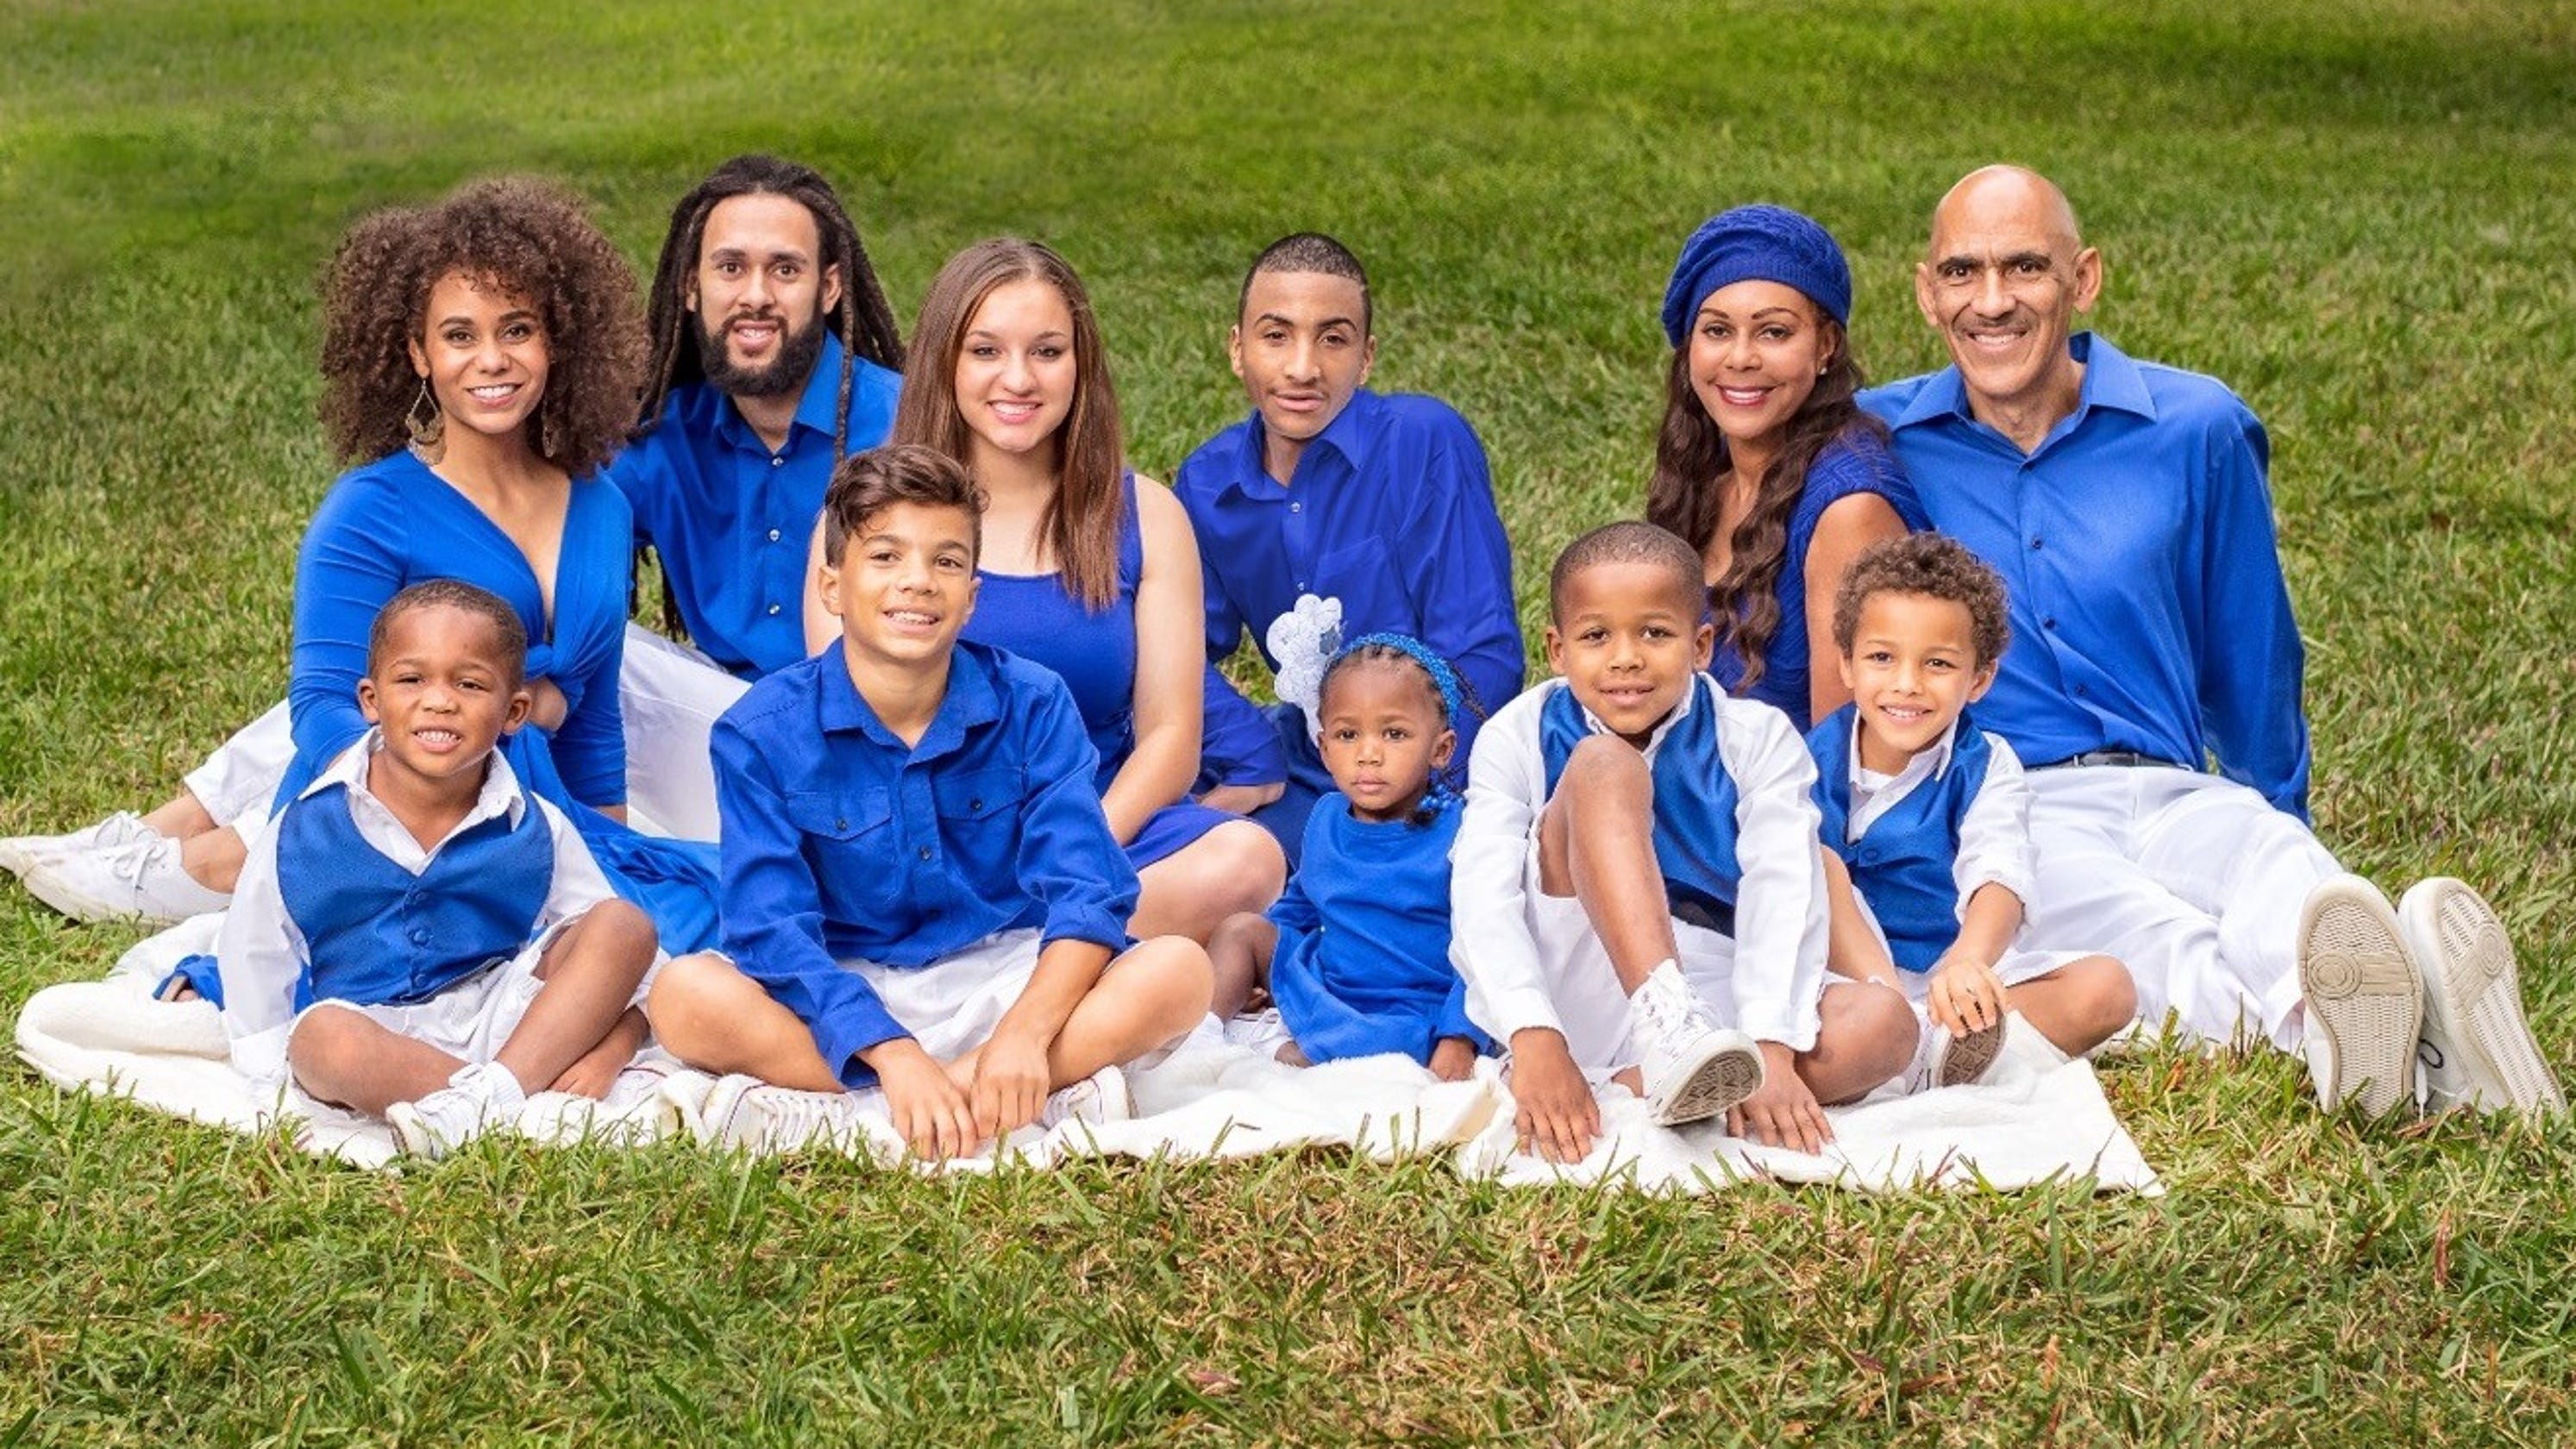 Tony Dungy has 7 adopted kids living under his roof ages 3 to 18